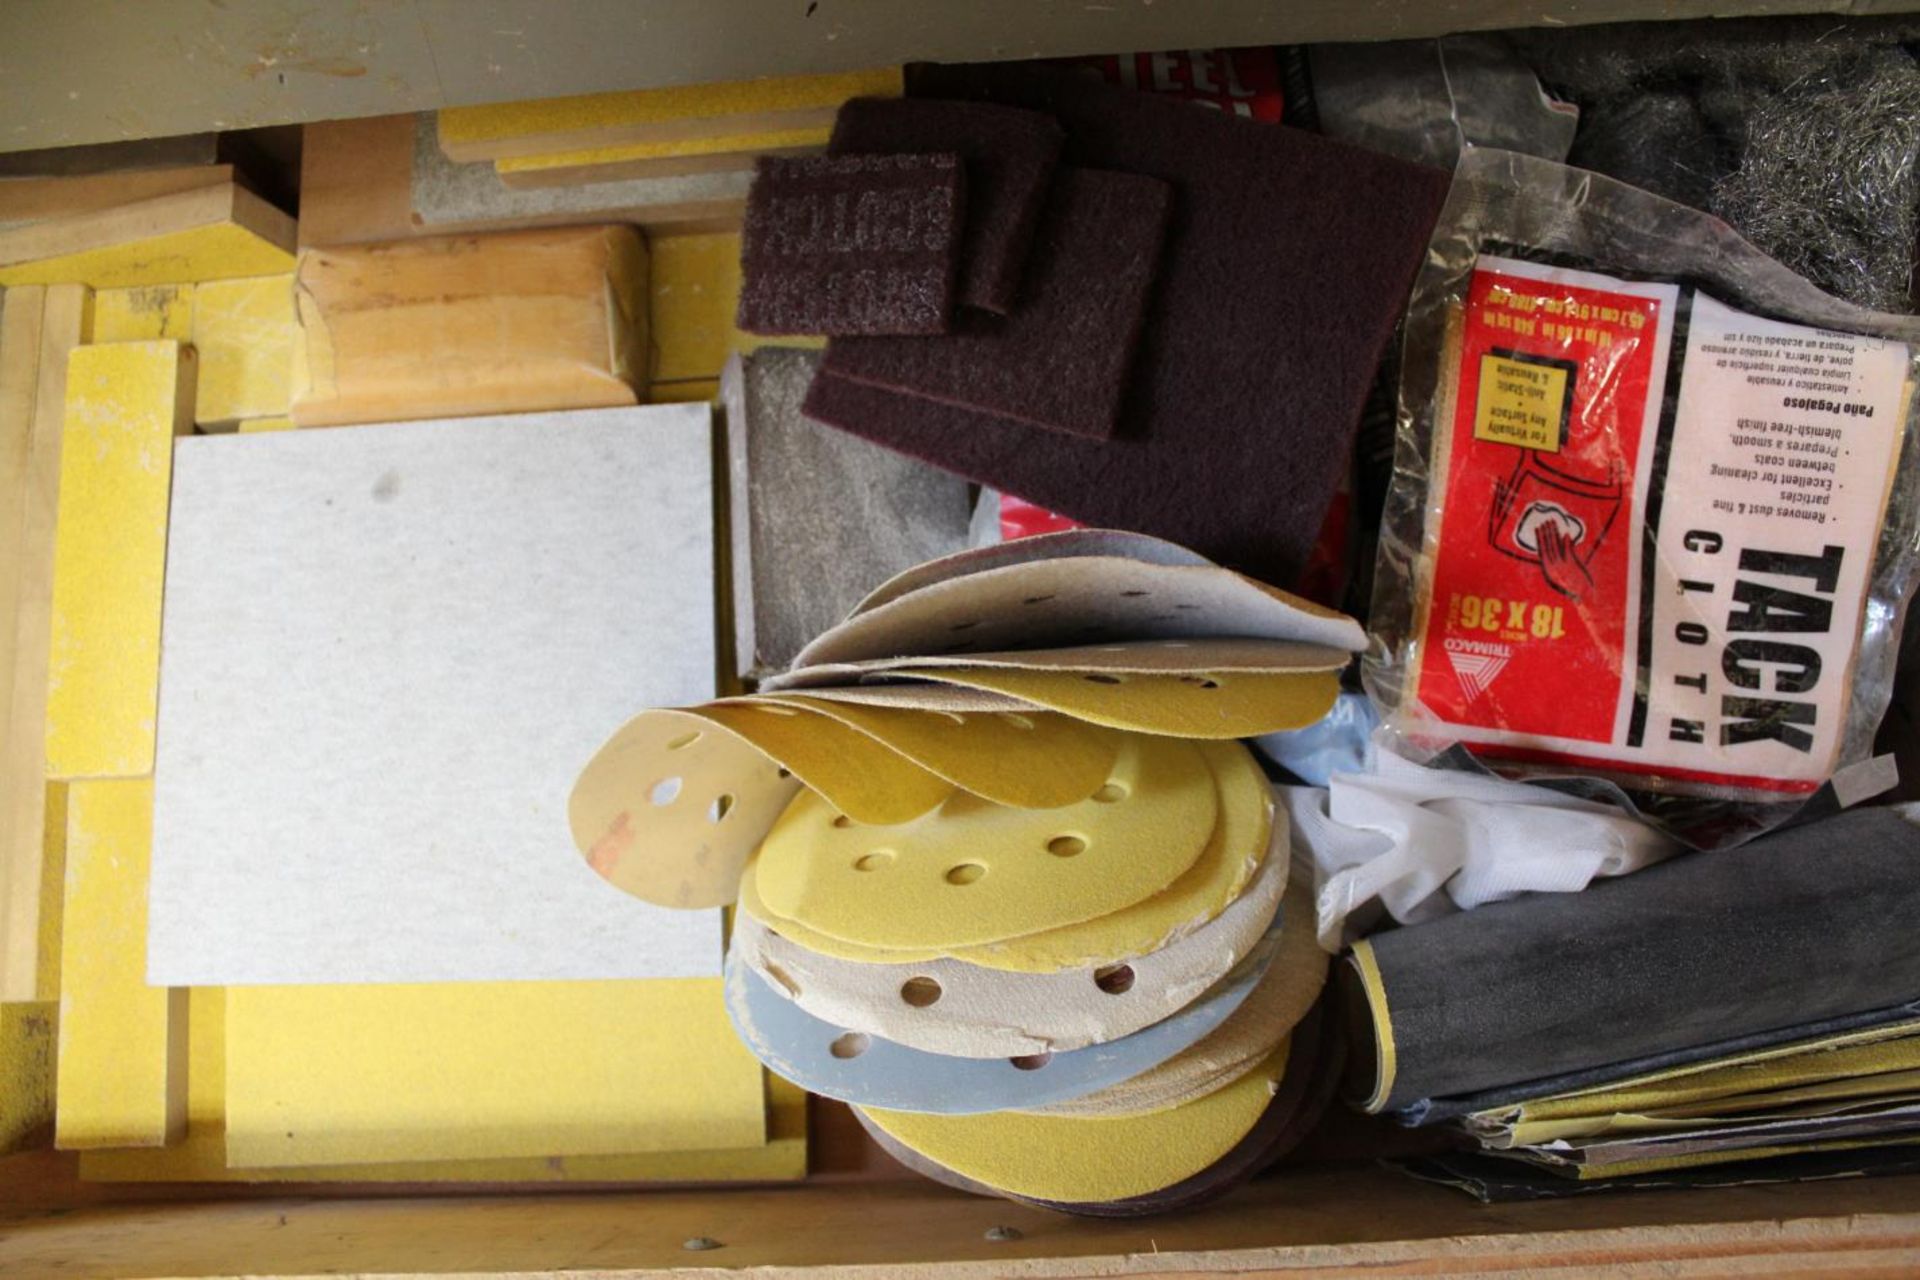 Contents of Drawer, Sand Paper & Sanding Blocks